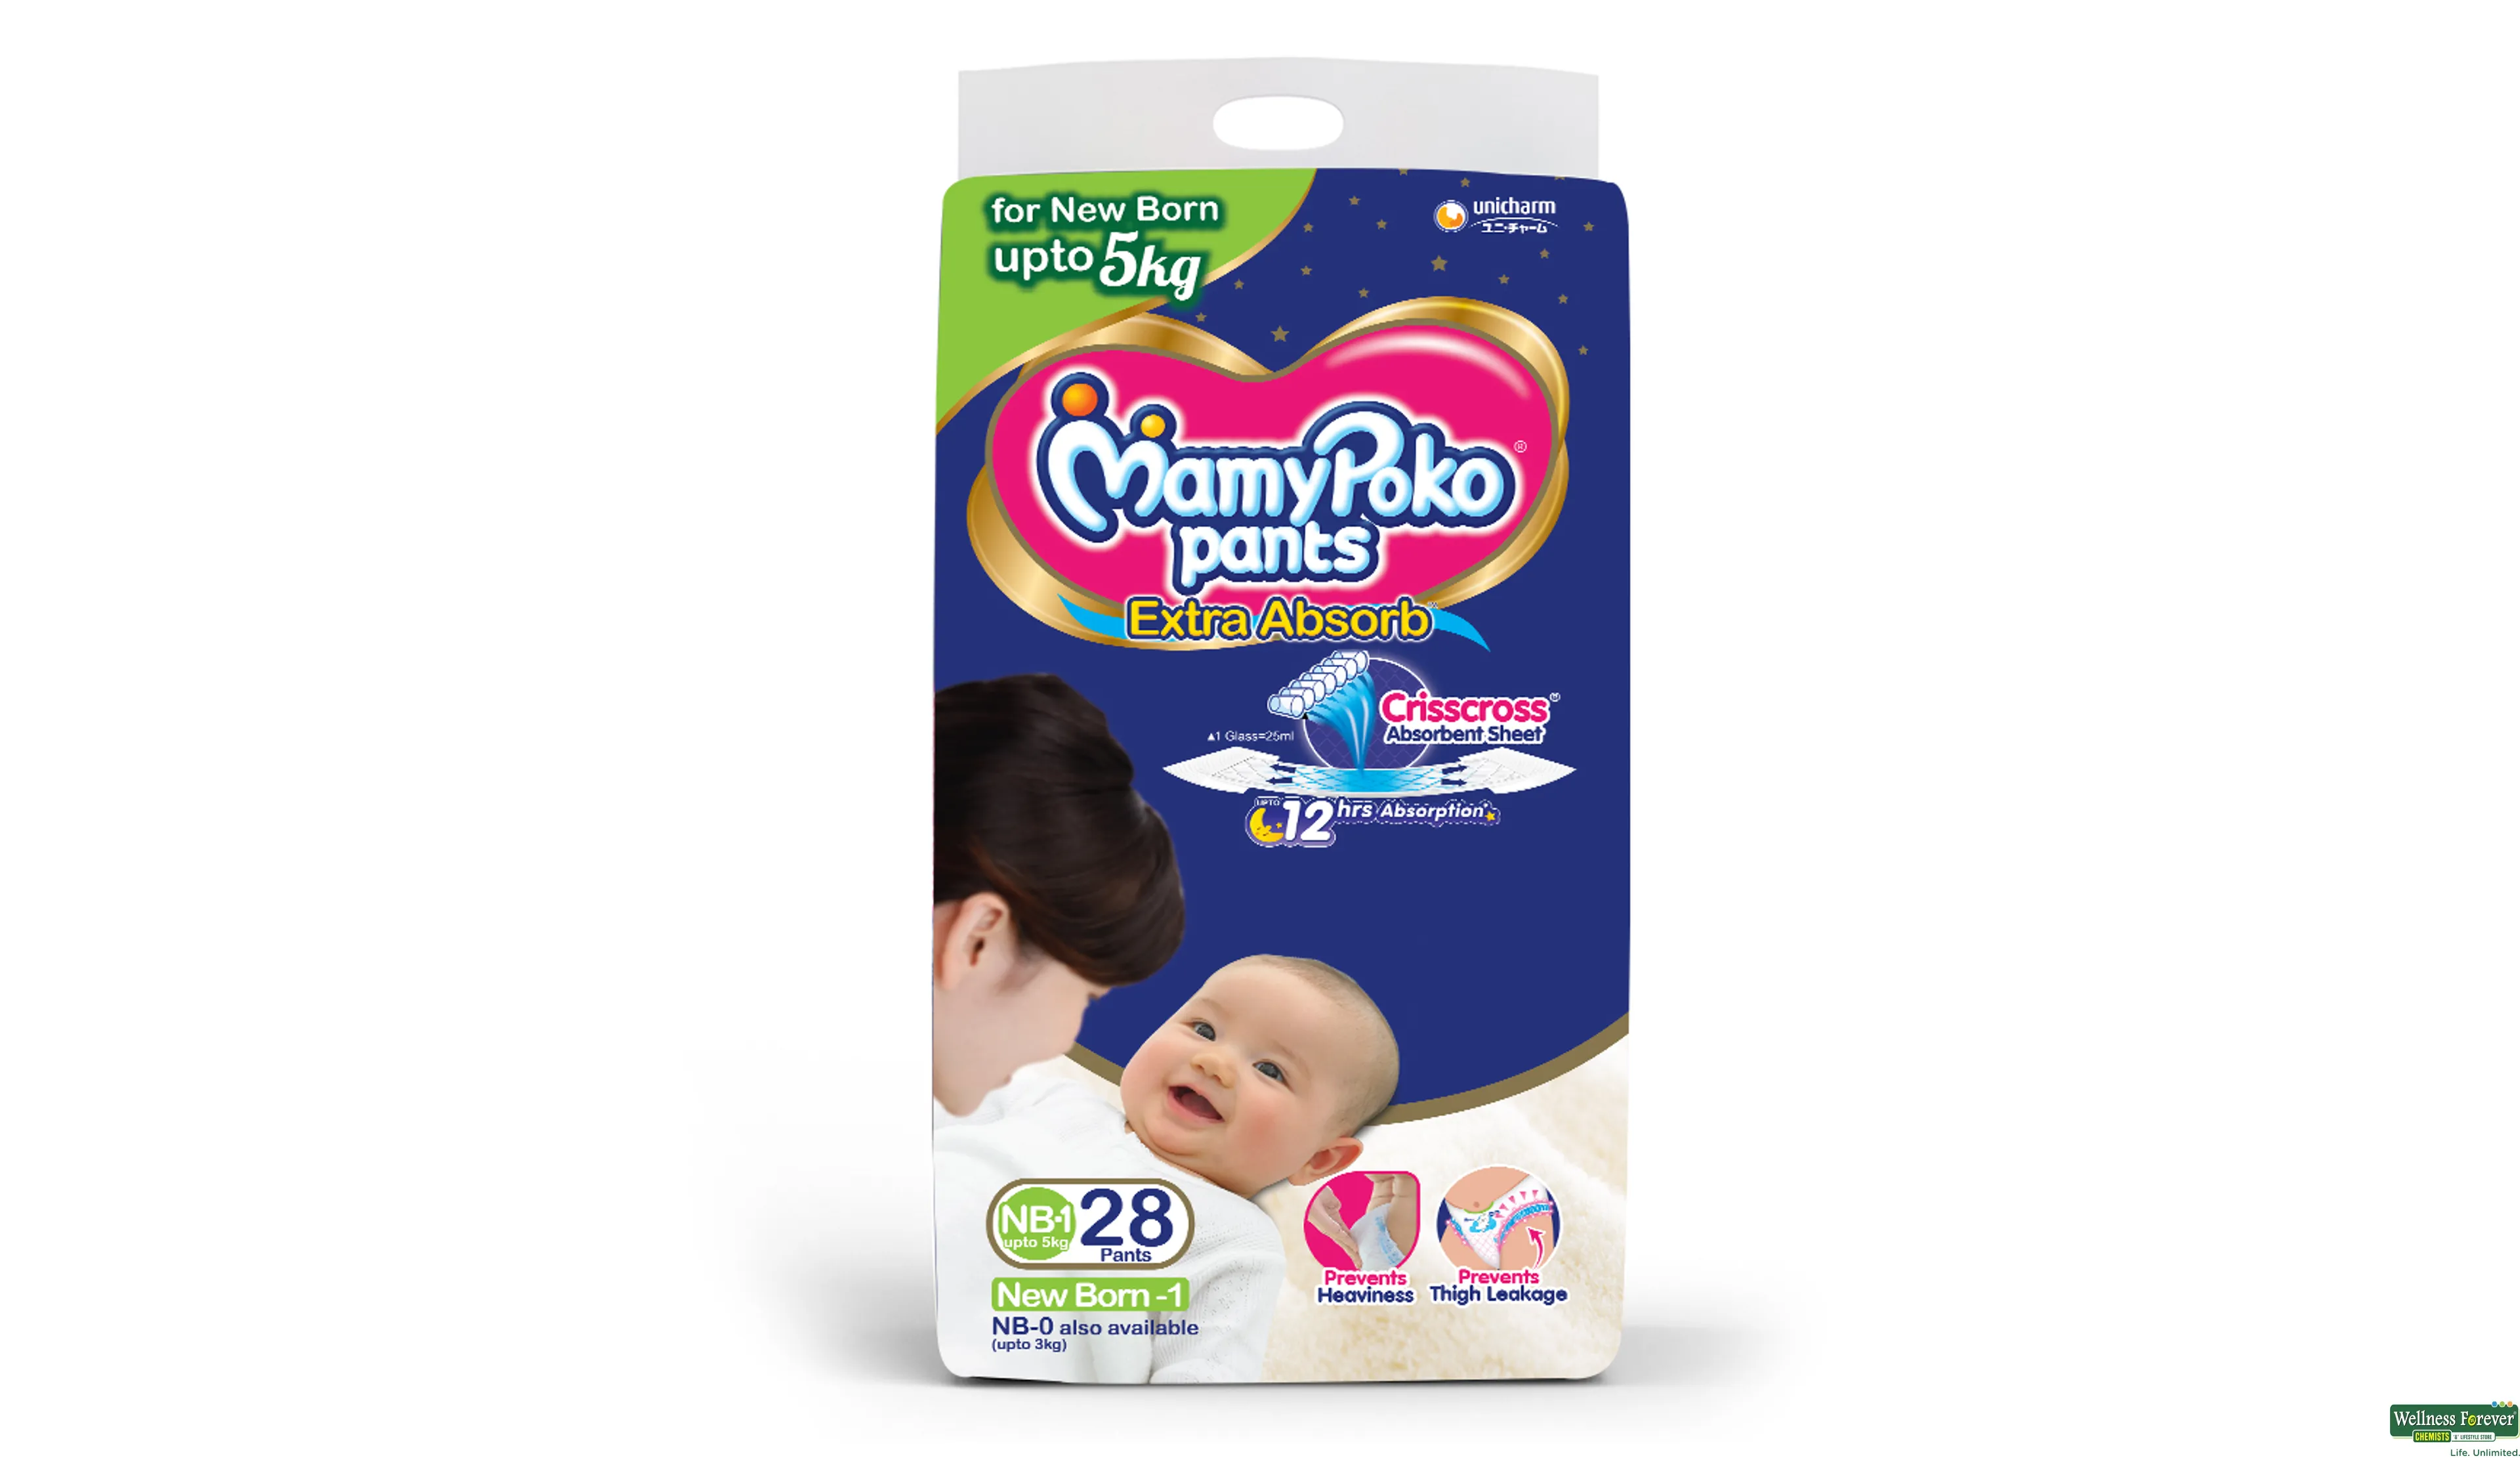 MamyPoko Pants Extra Absorb Diaper (M, 7-12 kg) - Pack of 2 Price - Buy  Online at Best Price in India